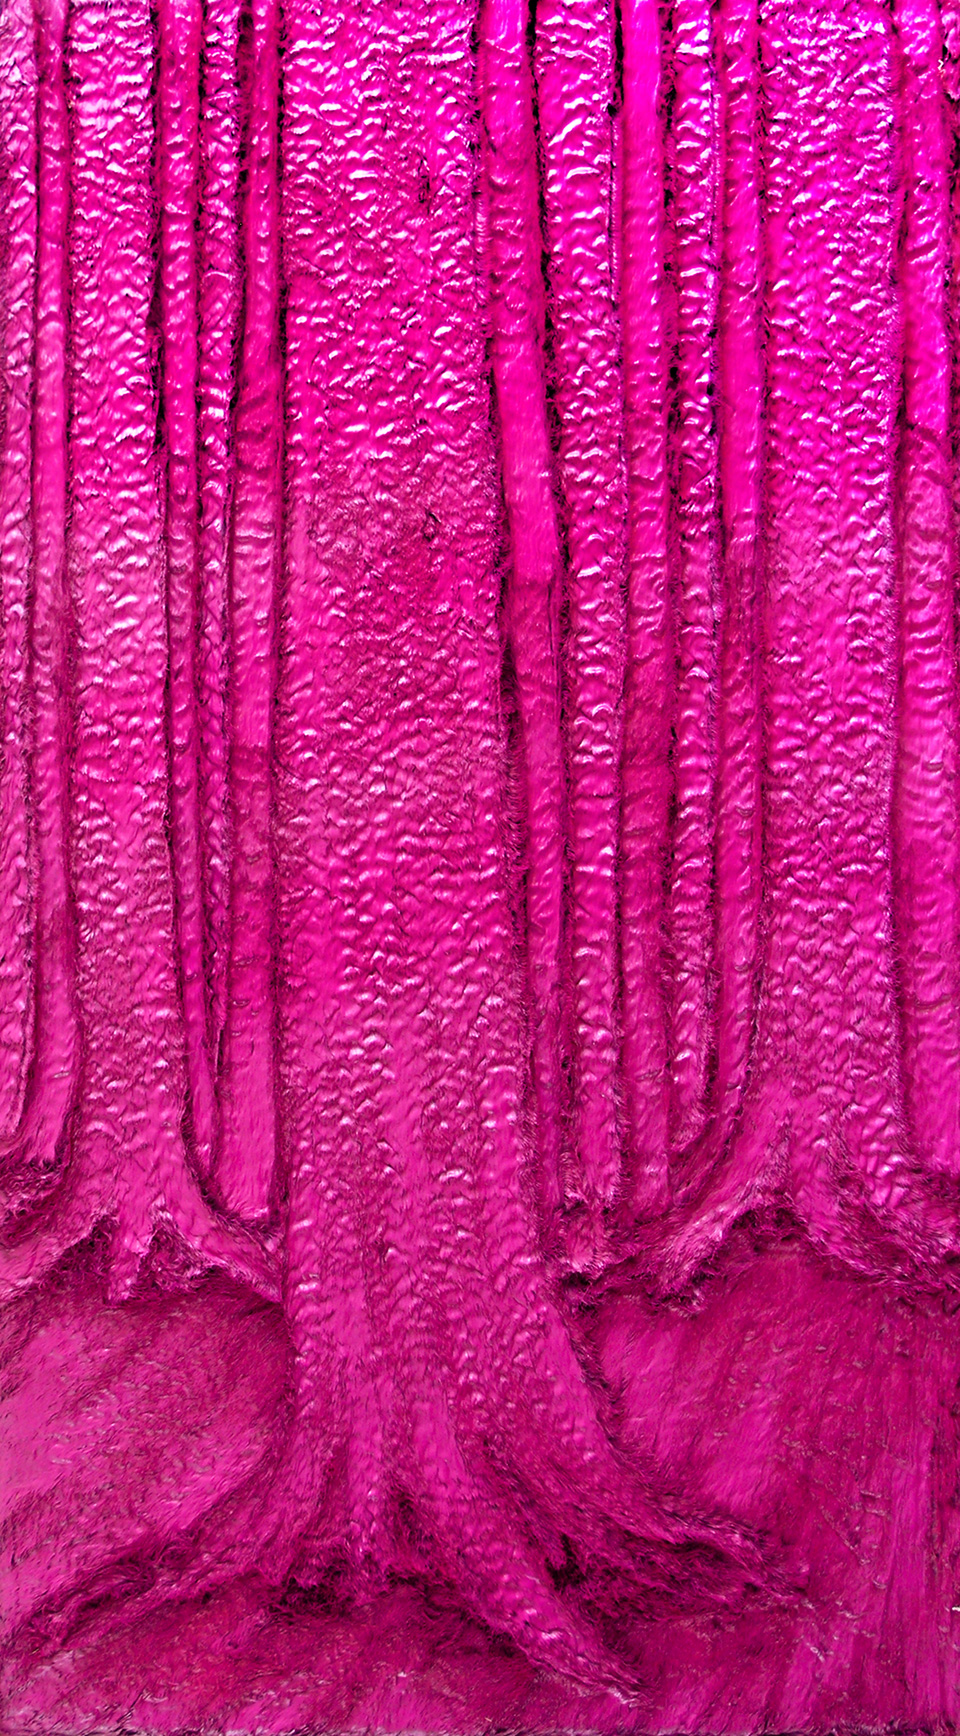 Pink Forest 2, a painting by Guido Vrolix